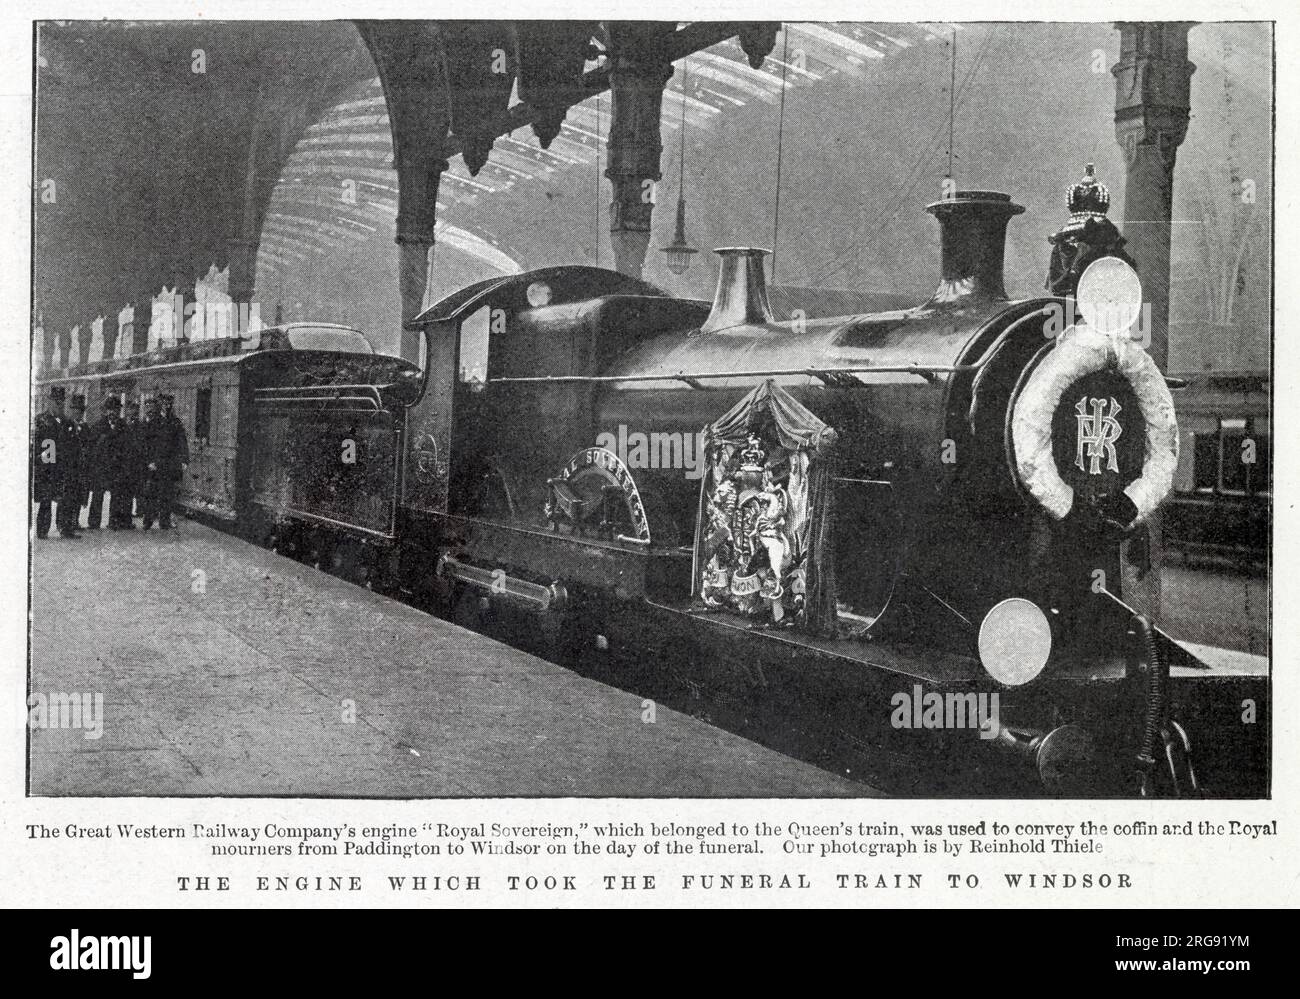 The Great Western Railway Company's engine, 'Royal Sovereign' which belonged to Queen Victoria train was used to convey the coffin and the Royal mourners on the day of the funeral. Leaving from Paddington to Frogmore Mausoleum at Windsor, Great Park, to be interred beside Prince Albert. Stock Photo